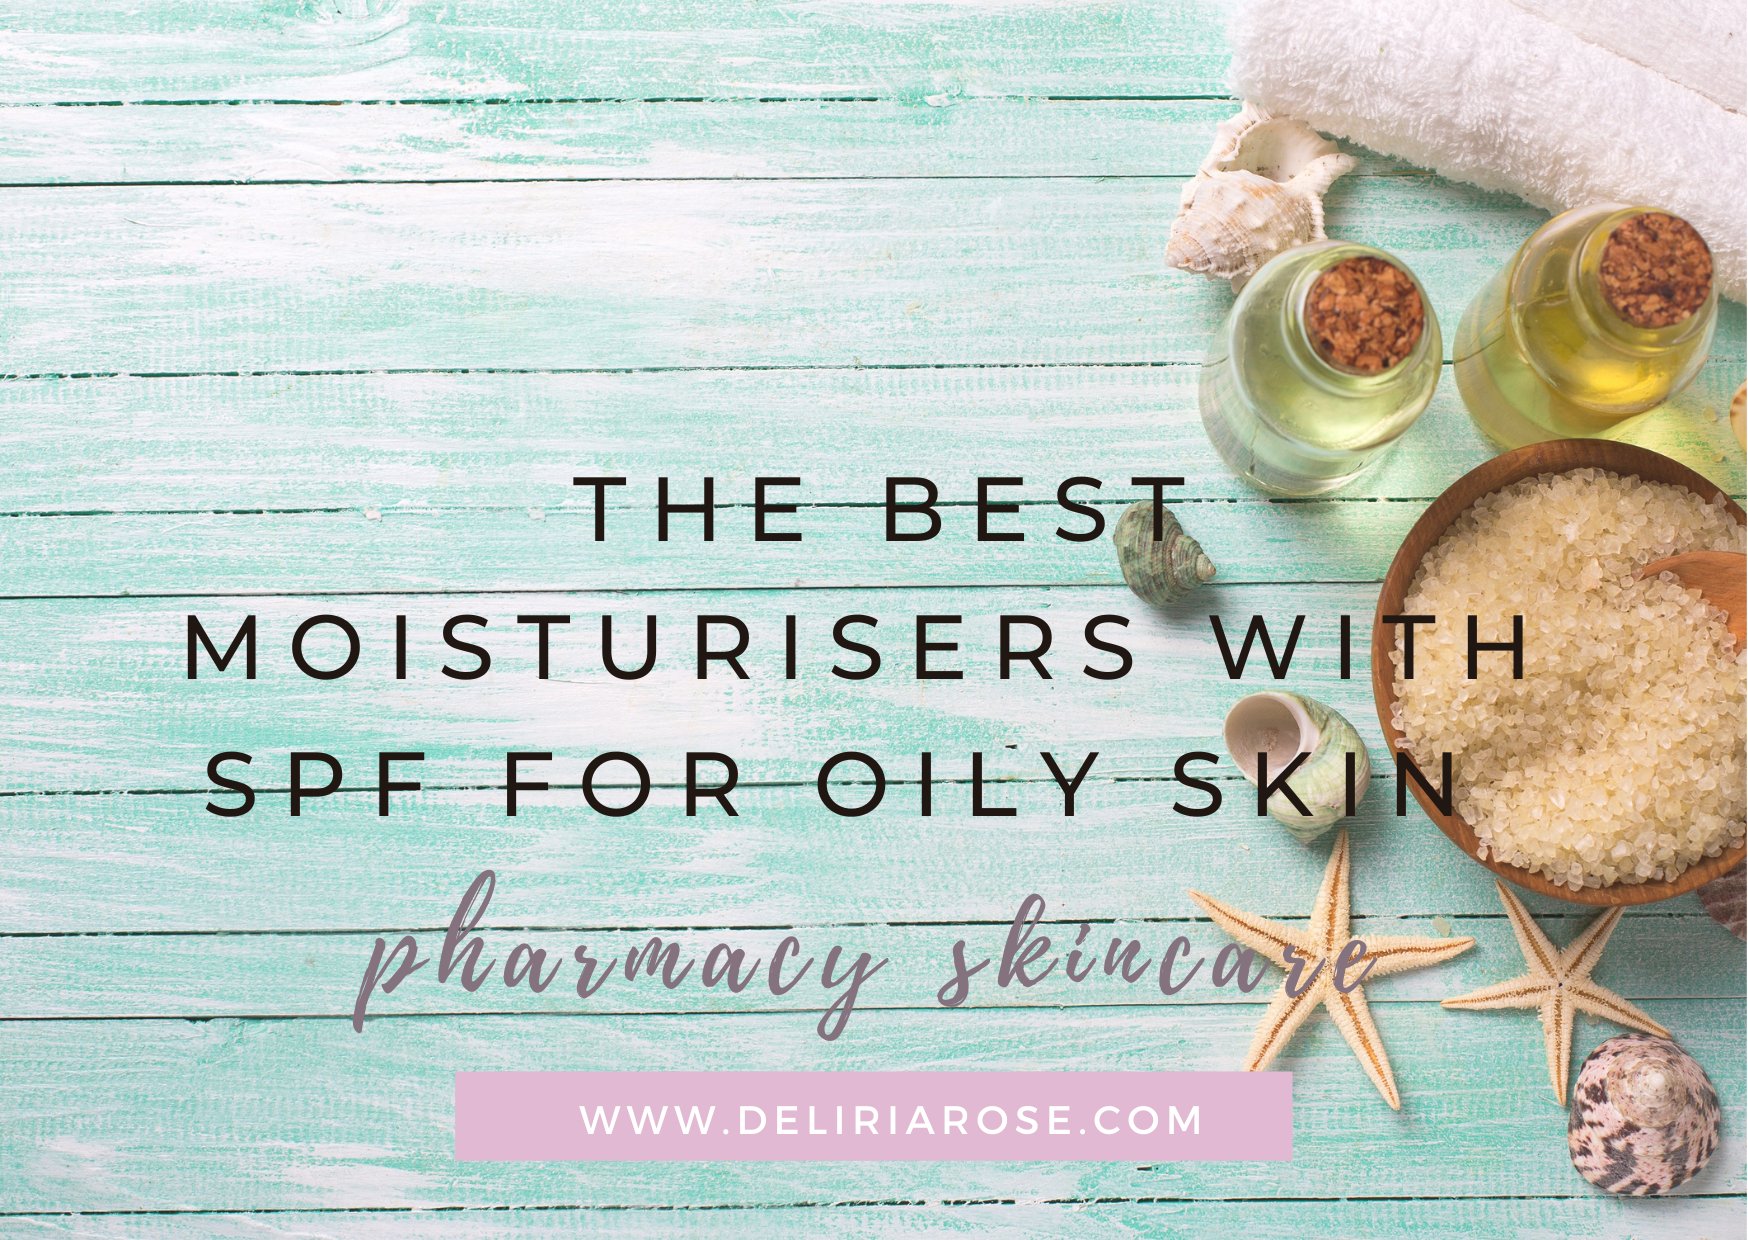 THE BEST MOISTURISERS WITH SPF FOR OILY SKIN - PHARMACY SKINCARE